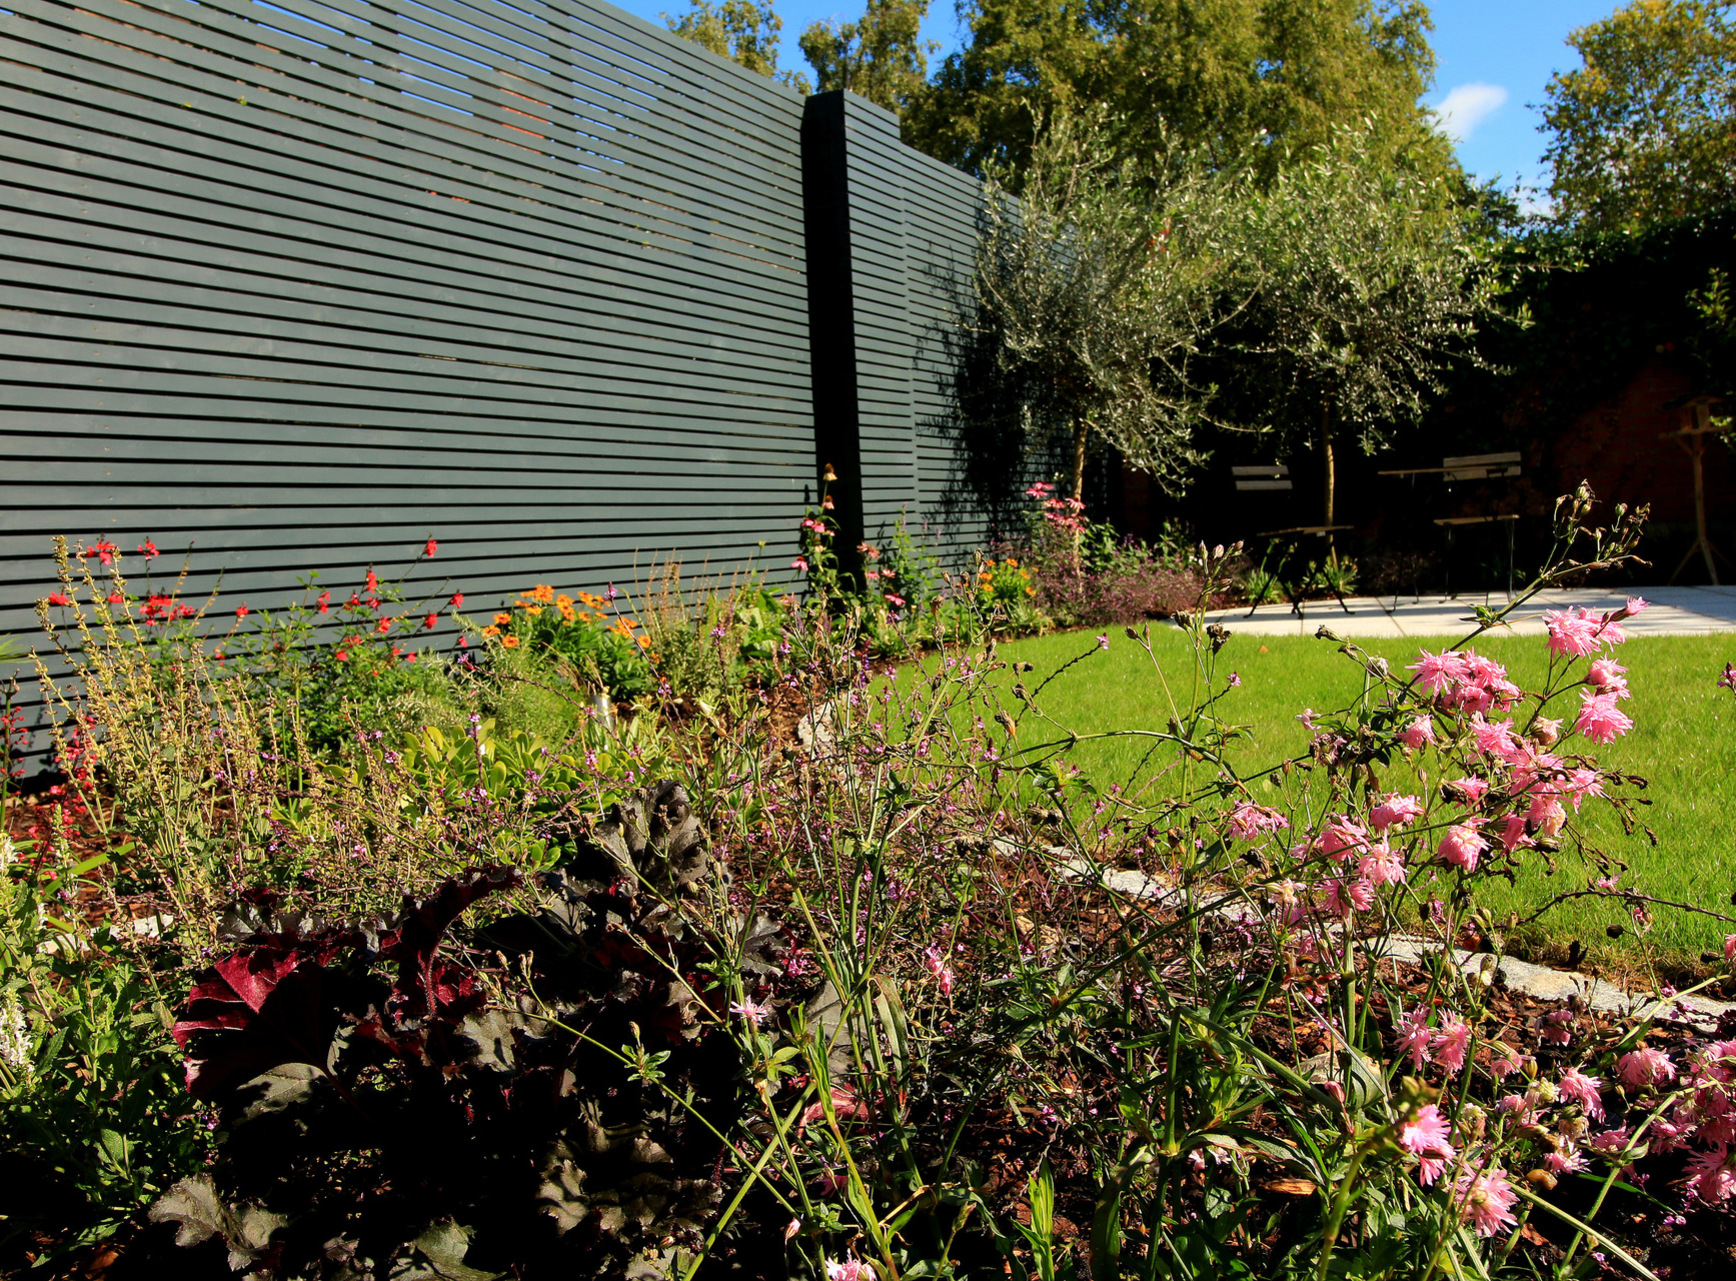 Stunning mixed planting scheme with custom horizontal slatted fencing in Blackrock, Co Dublin